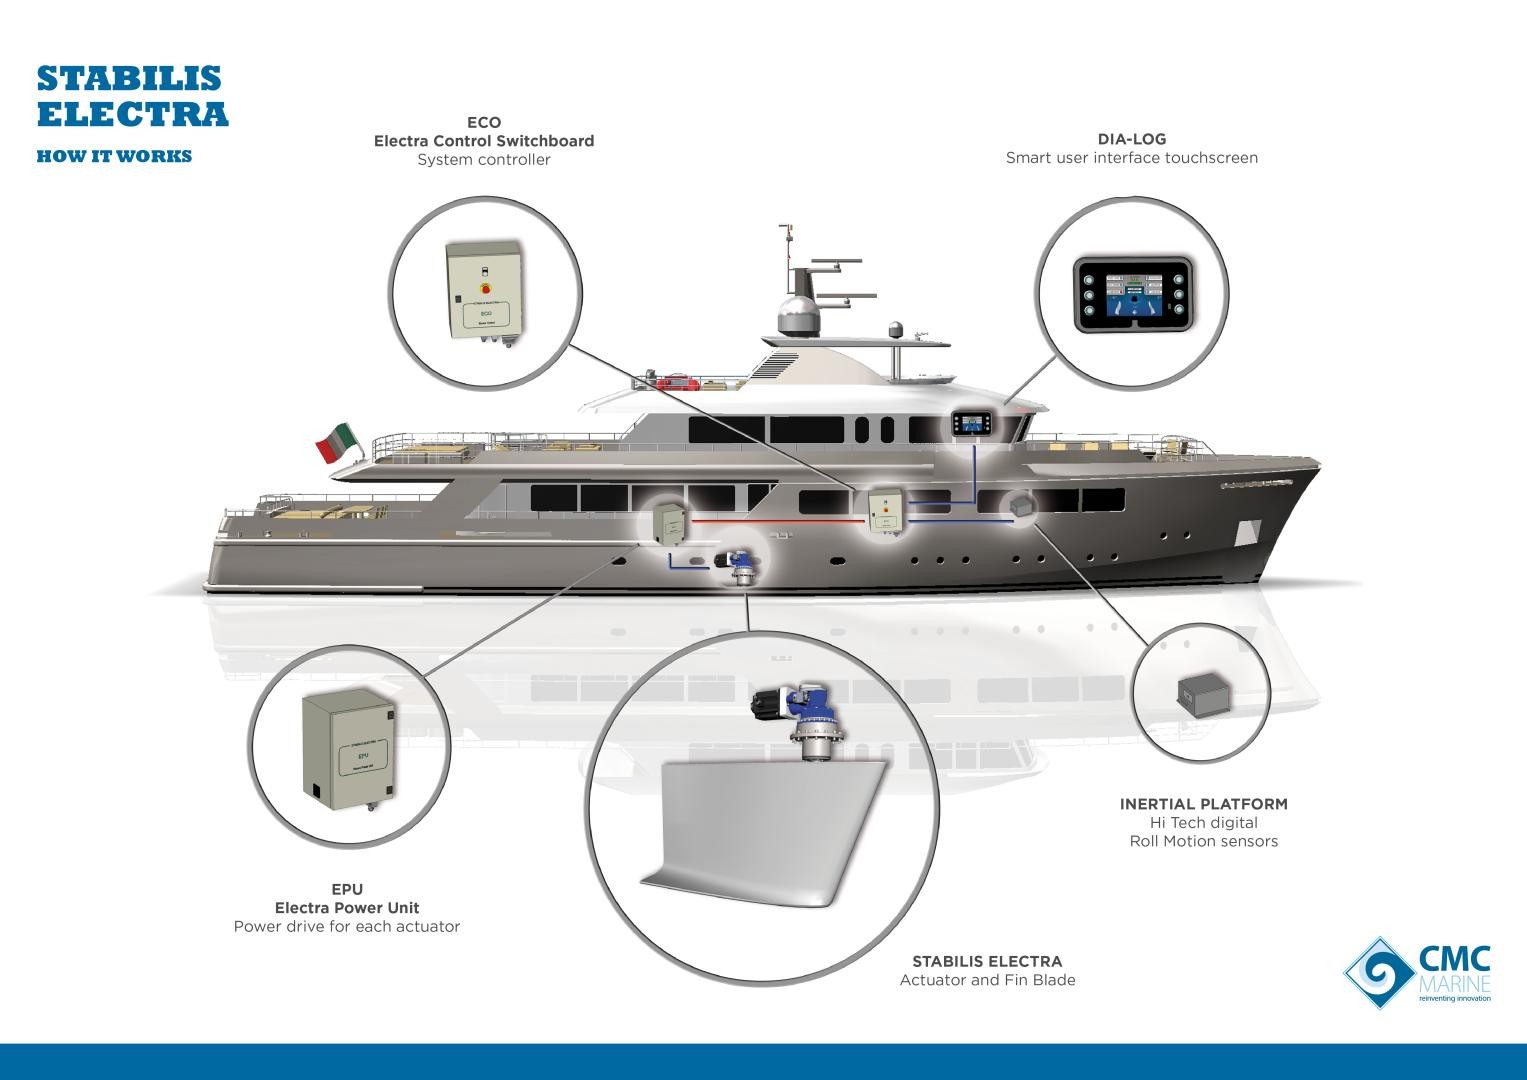 CMC Marine confirms its participation in the Yachtmaster